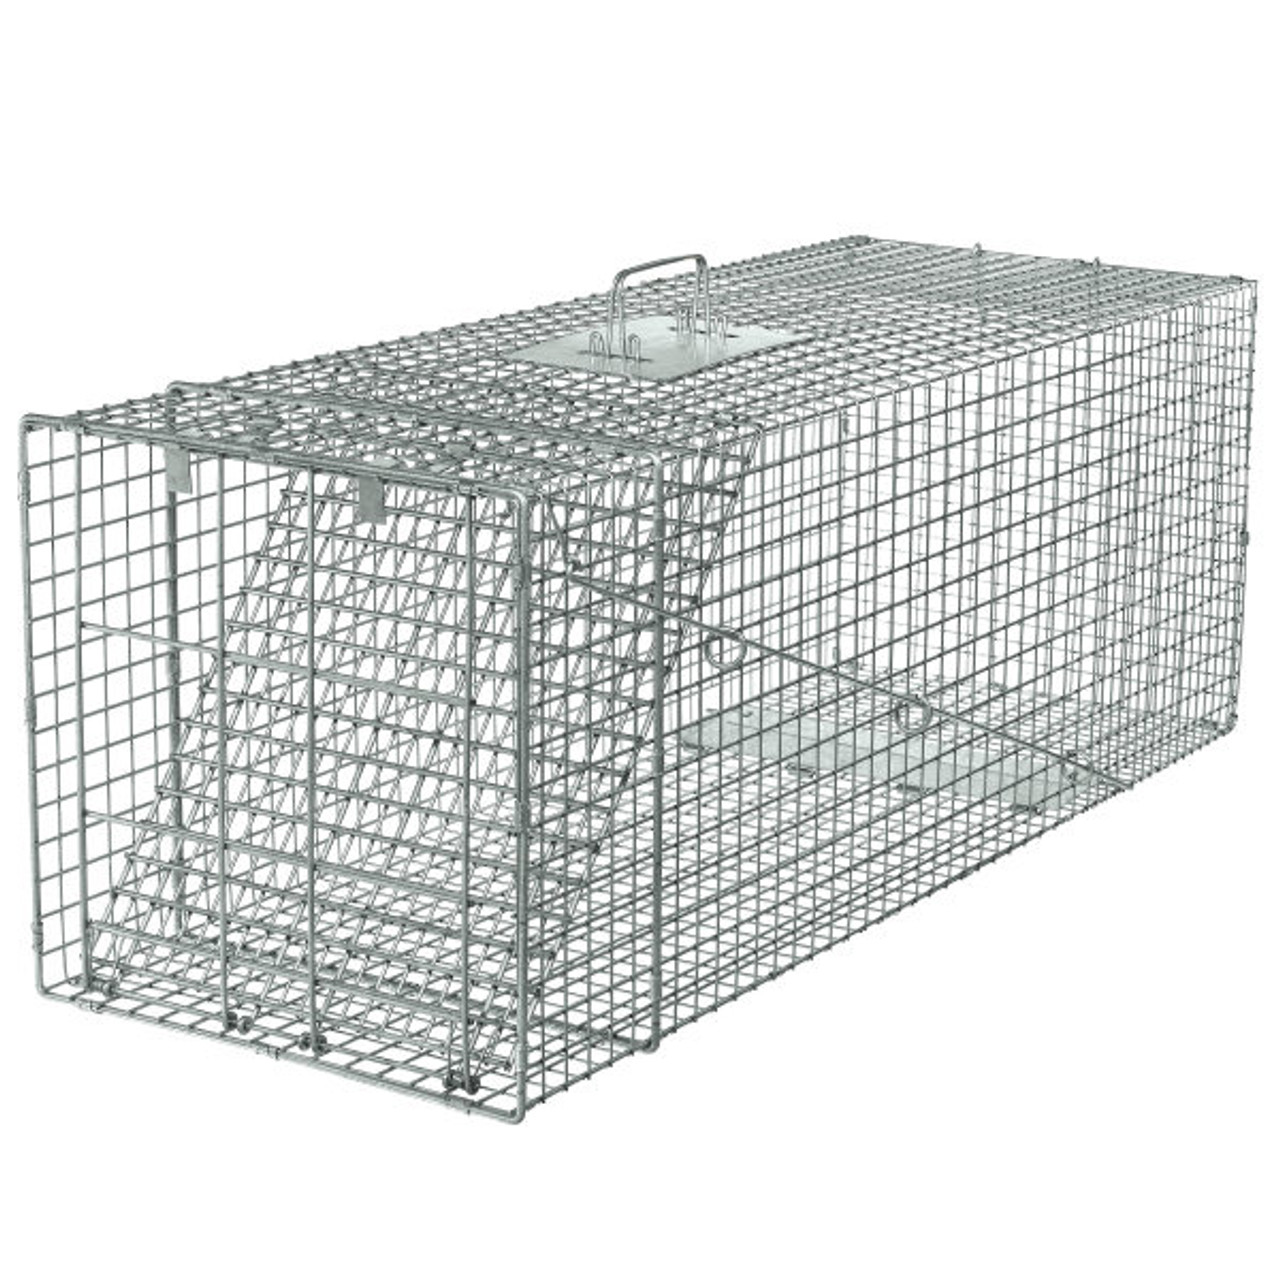 Bird Trap Outdoor Hunting Trap Bird nets Camping Hunting Cage Tools Cage  Trap,Sturdy Upgraded Version of The breeding Hunting Animal Traps for Birds